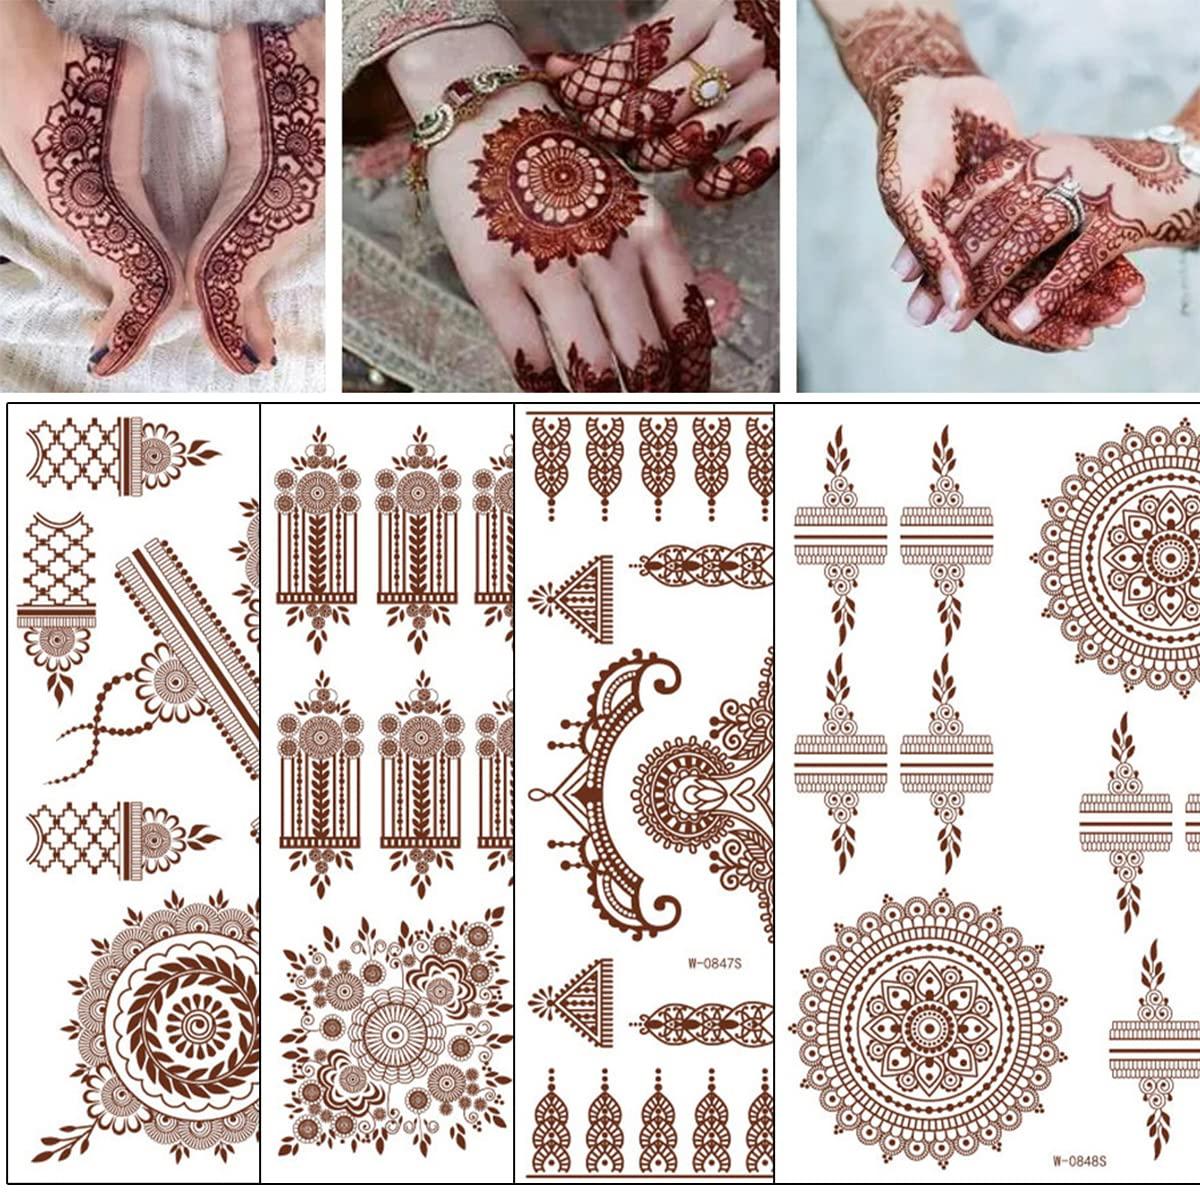 Premium Metallic Henna Tattoos - 75+ Mandala Boho Designs in Gold and  Silver - Temporary Fake Shimmer Jewelry Tattoo - Flowers, Elephants,  Bracelets, Wrist and Arm Bands (Jasmine Collection) : Amazon.in: Beauty